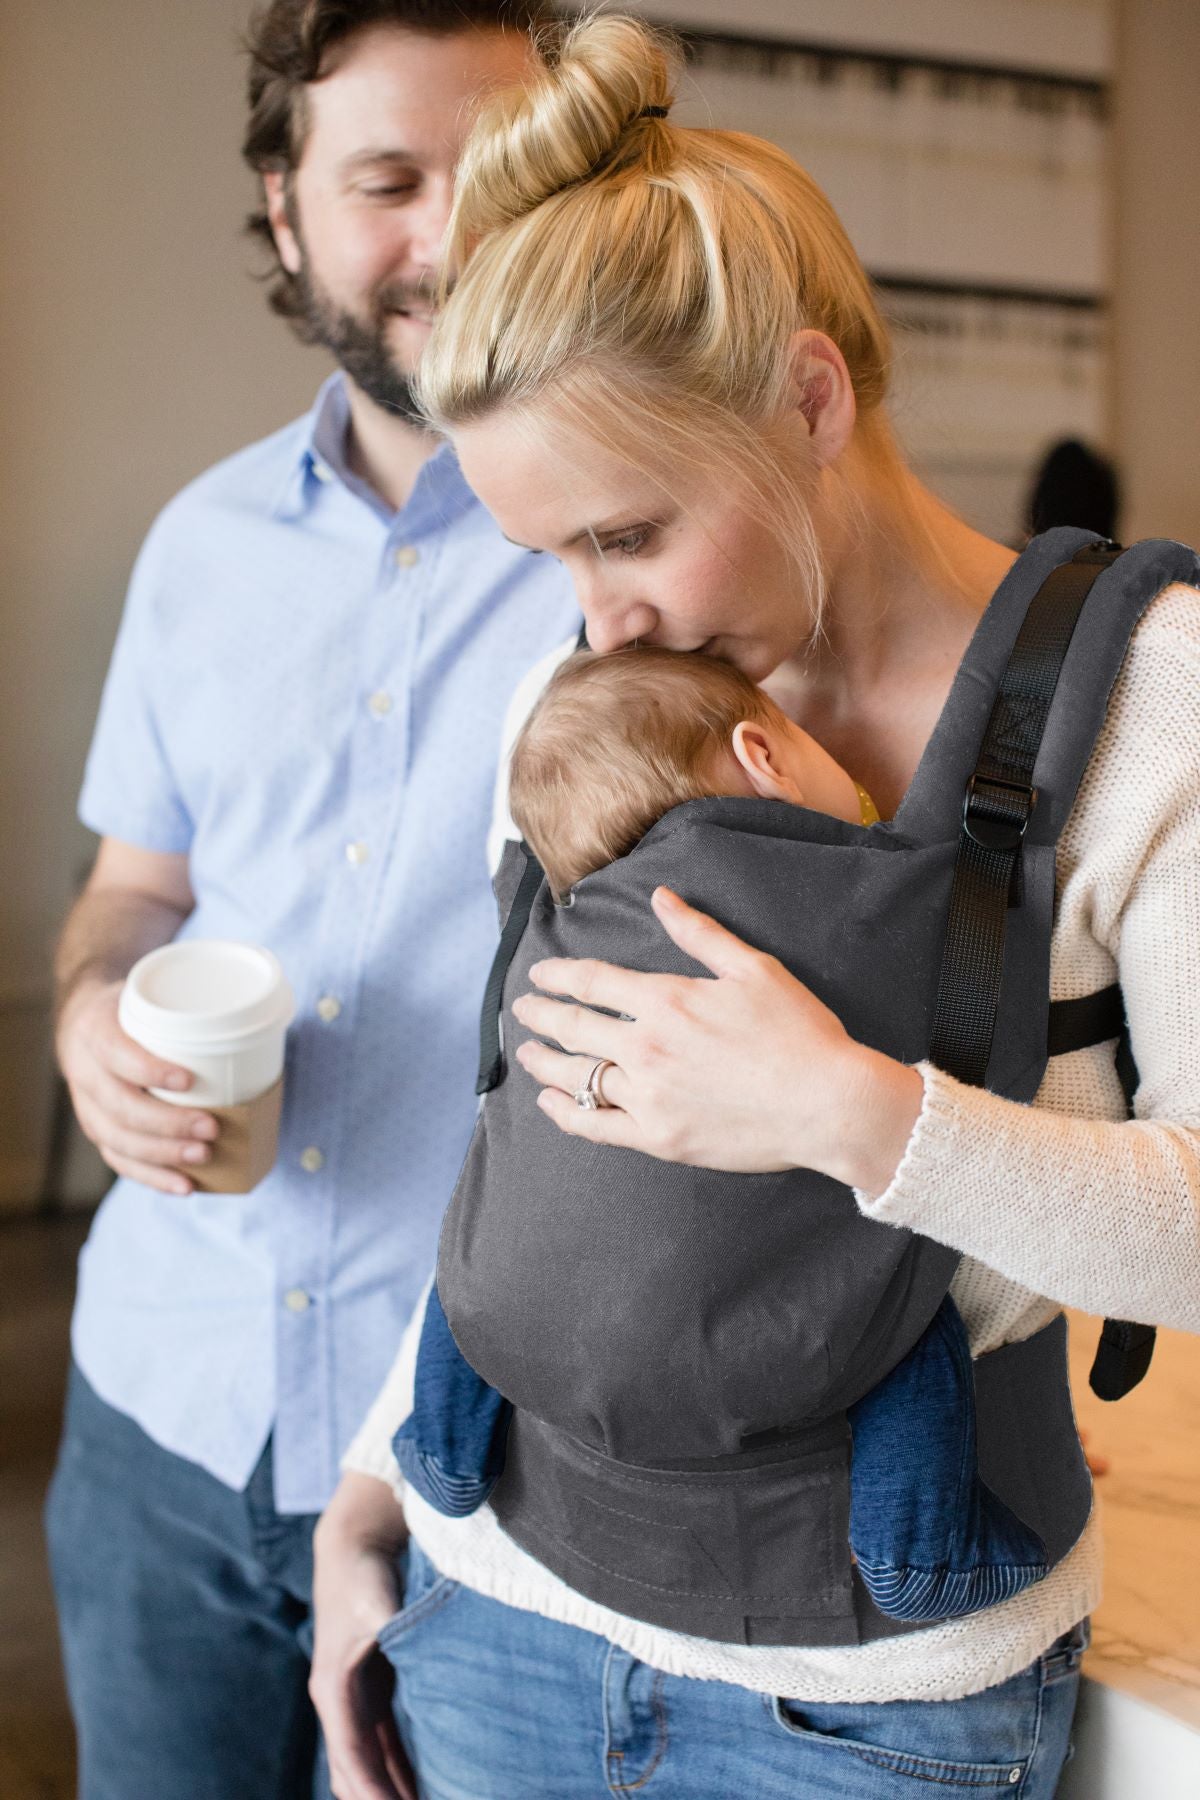 Graphite - Free-to-Grow Baby Carrier